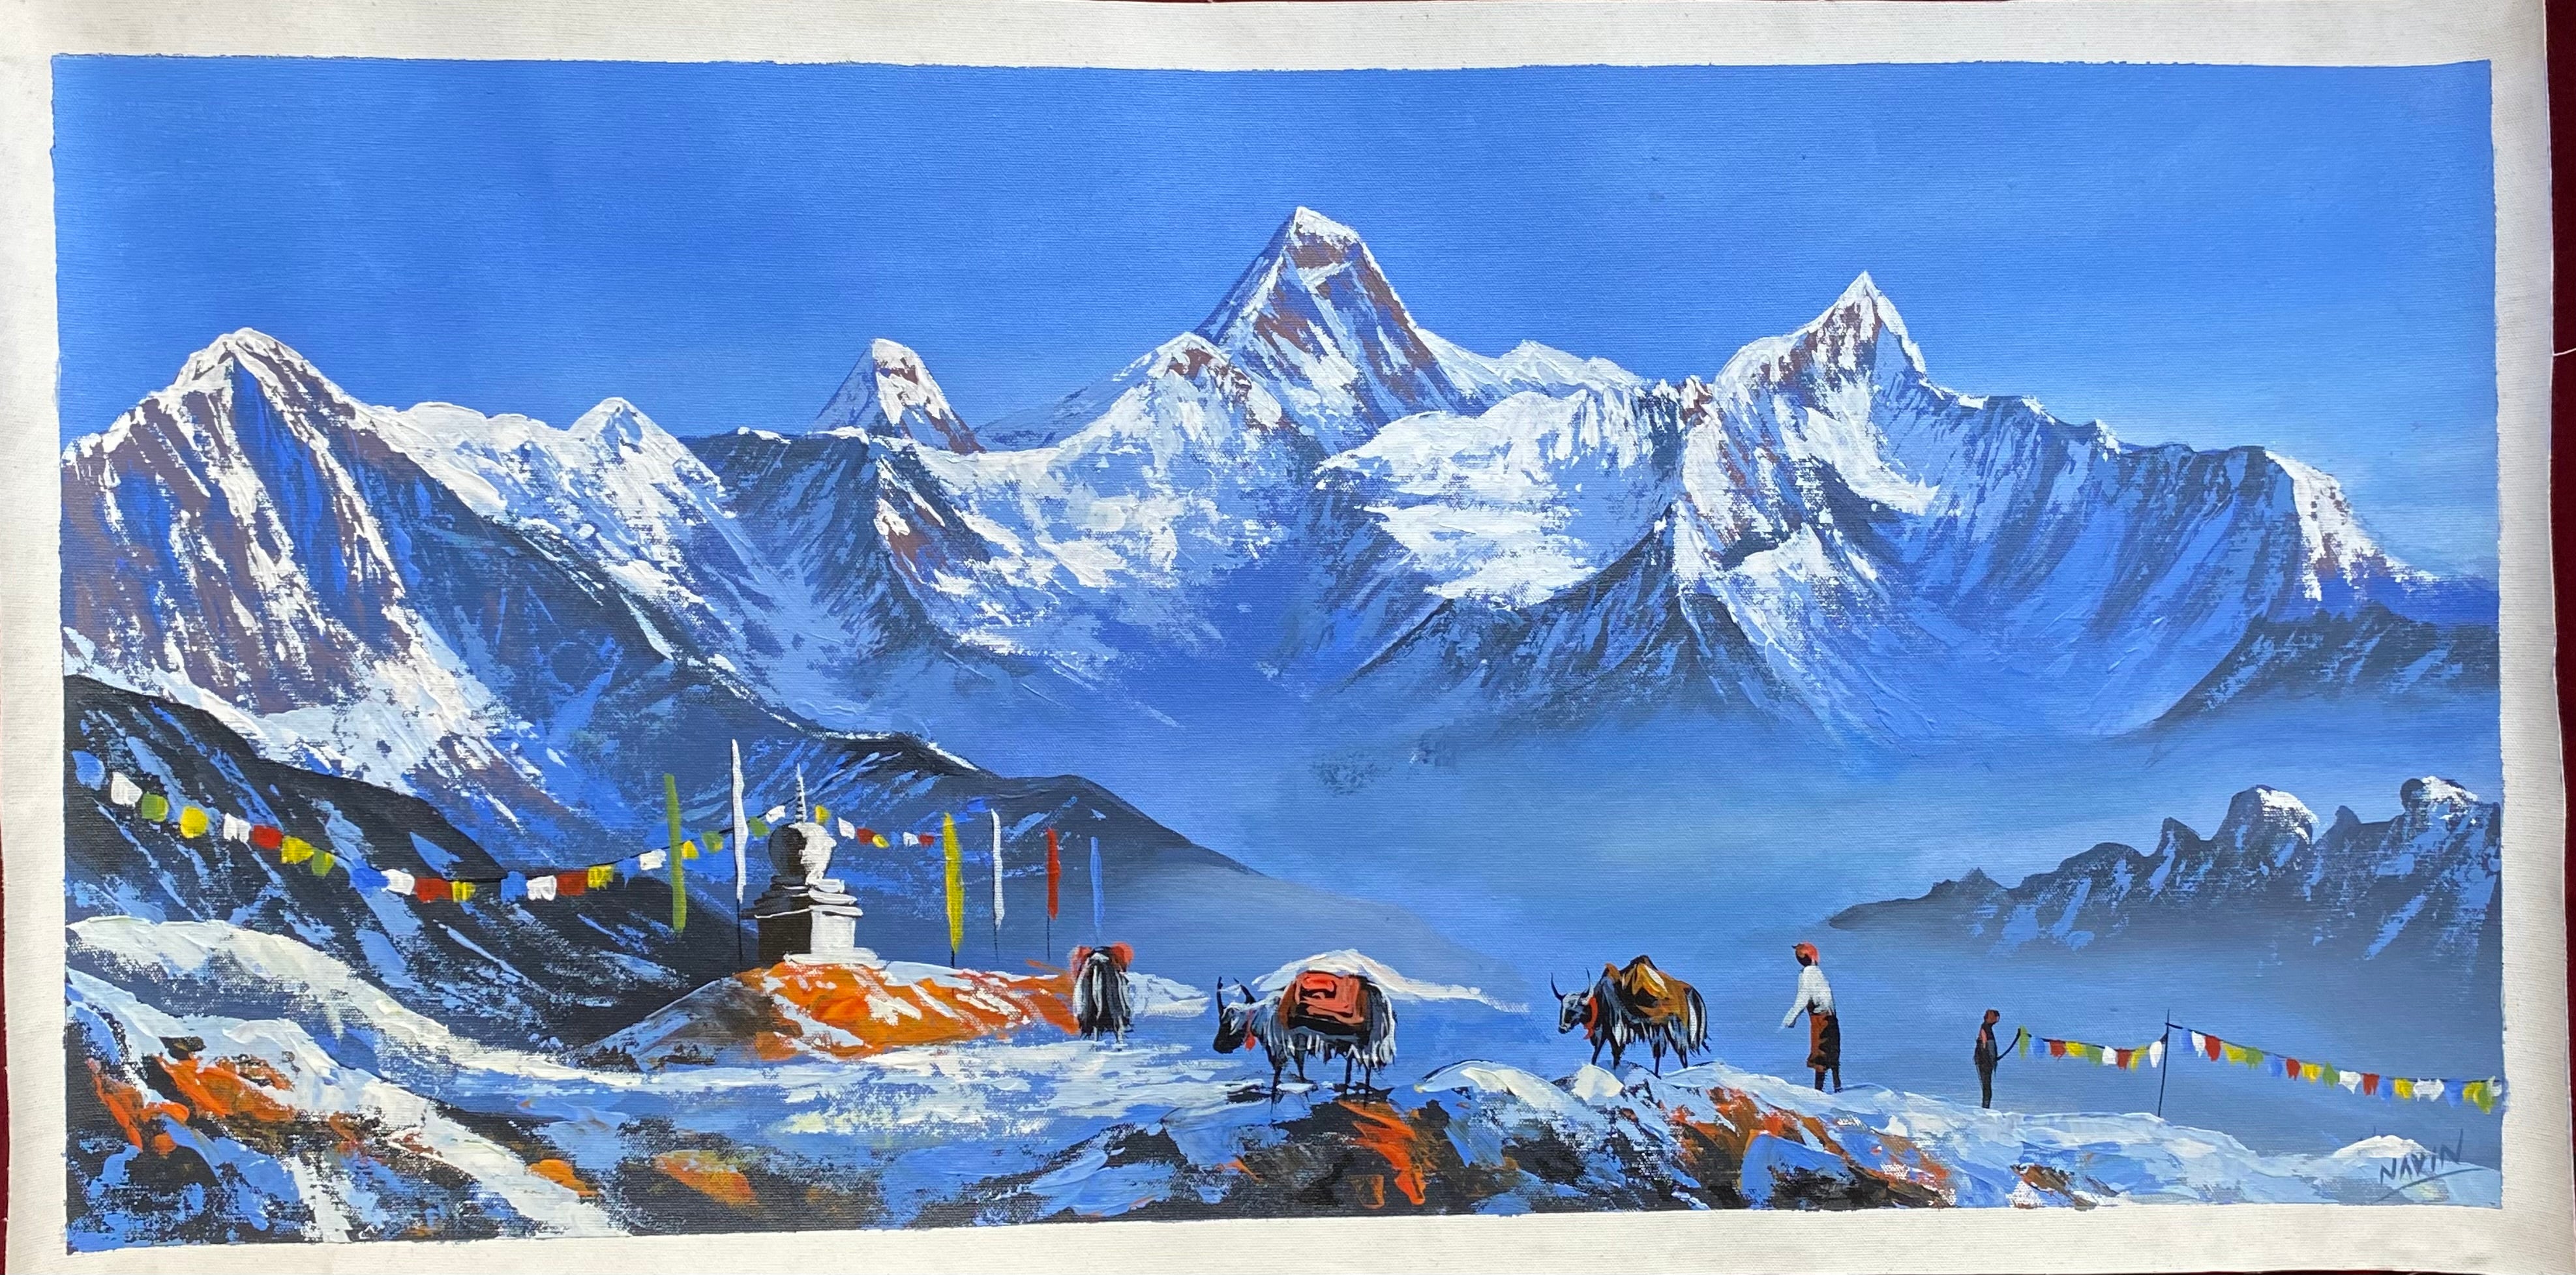 Authentic Oil Painting of Mount Everest.